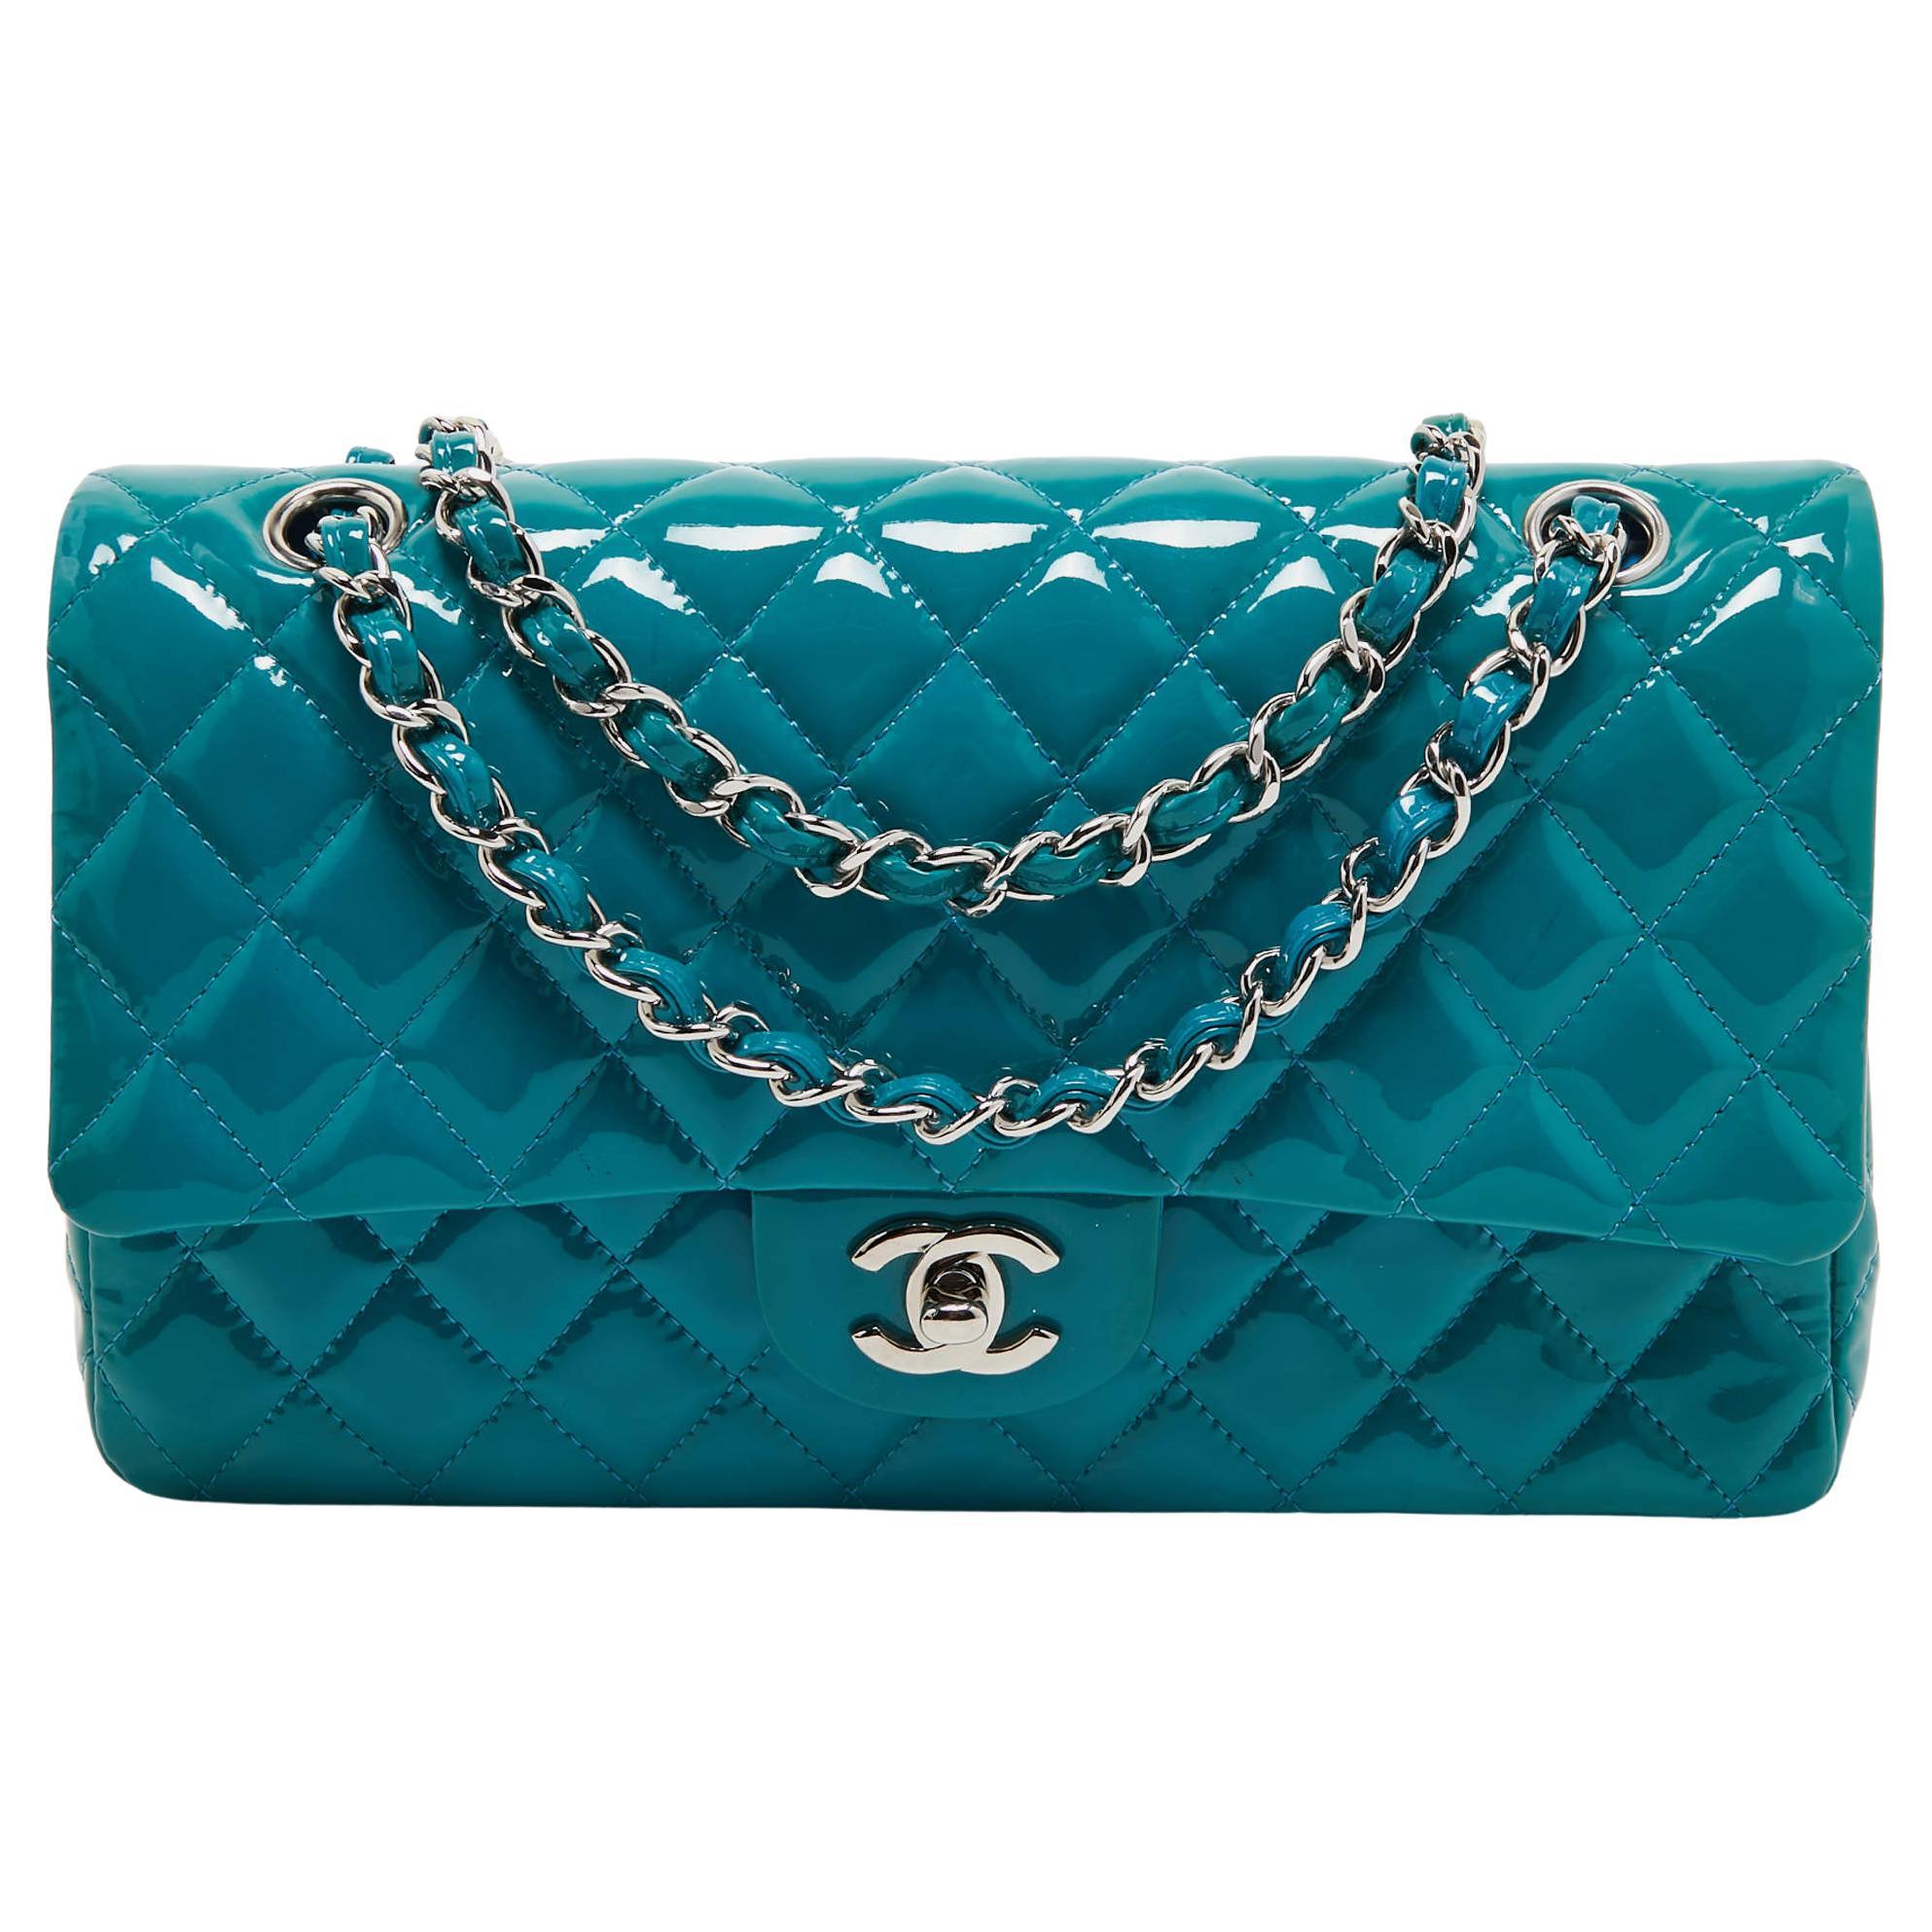 Chanel Teal Blue Quilted Patent Leather Medium Classic Double Flap Bag For Sale